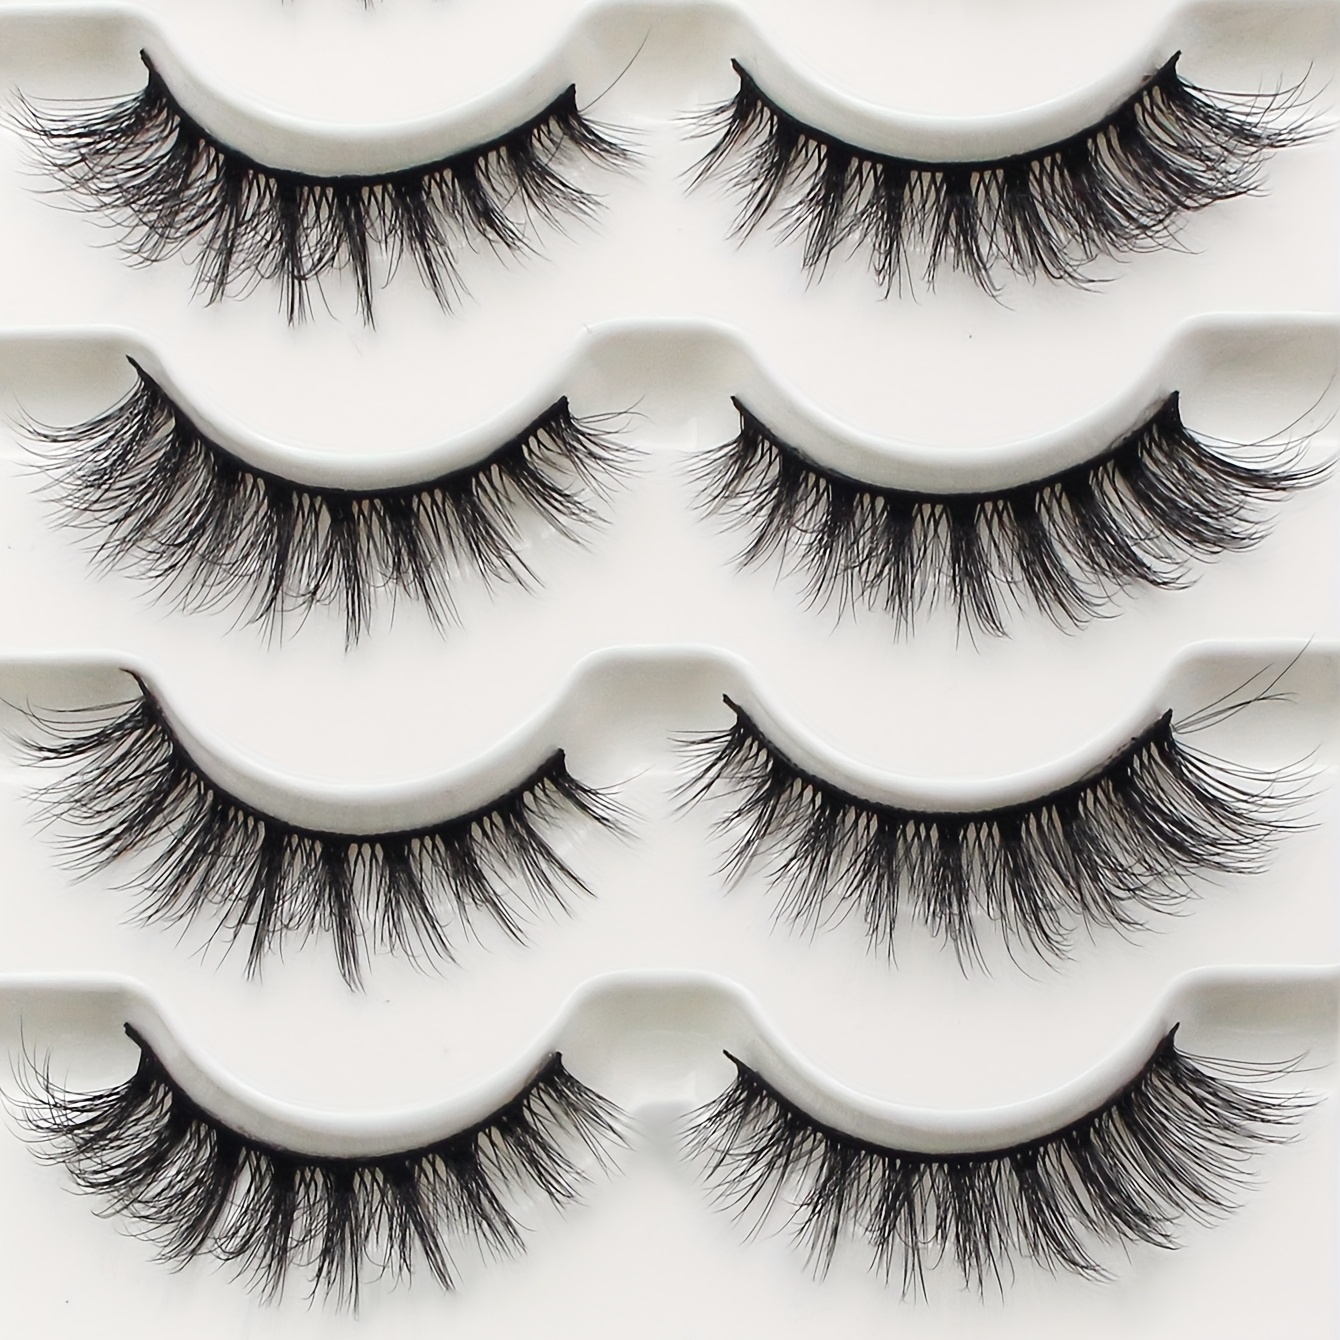 

5 Pairs Soft And Fluffy 3d Curling False Eyelashes For Women And Girls - Natural Look Extensions For A Long-lasting And Enhanced Eye Look